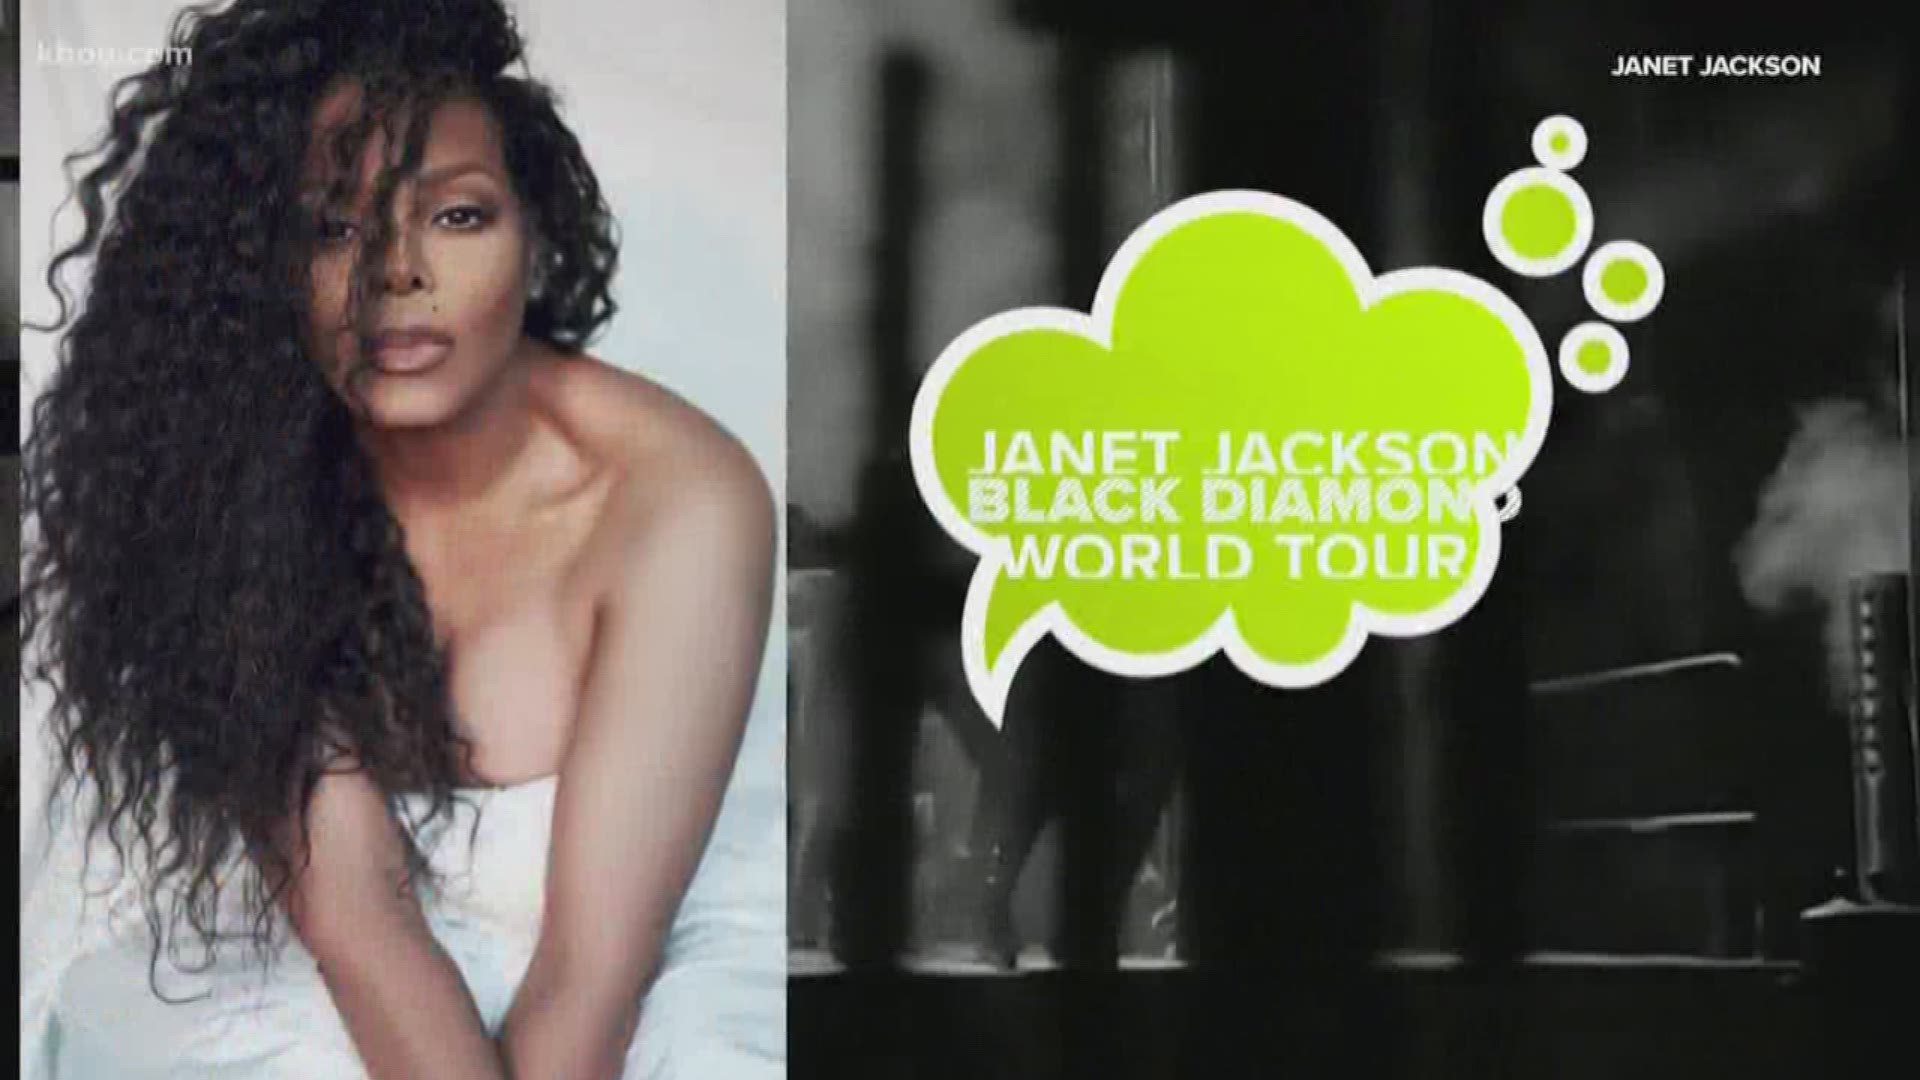 Janet Jackson will be performing at the Toyota Center in August for her "Black Diamond World Tour."